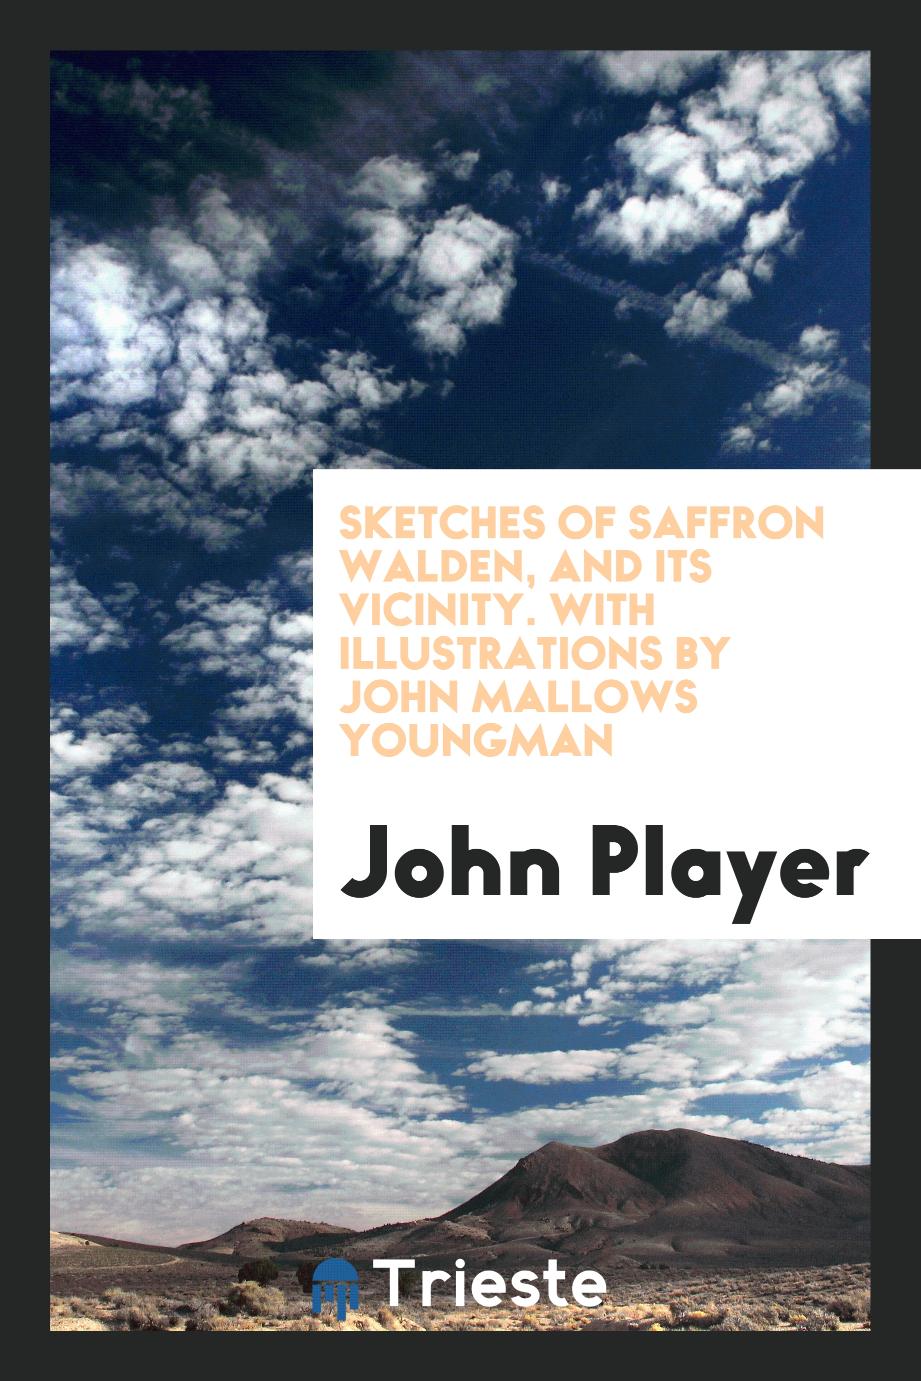 Sketches of Saffron Walden, and Its Vicinity. With Illustrations by John Mallows Youngman